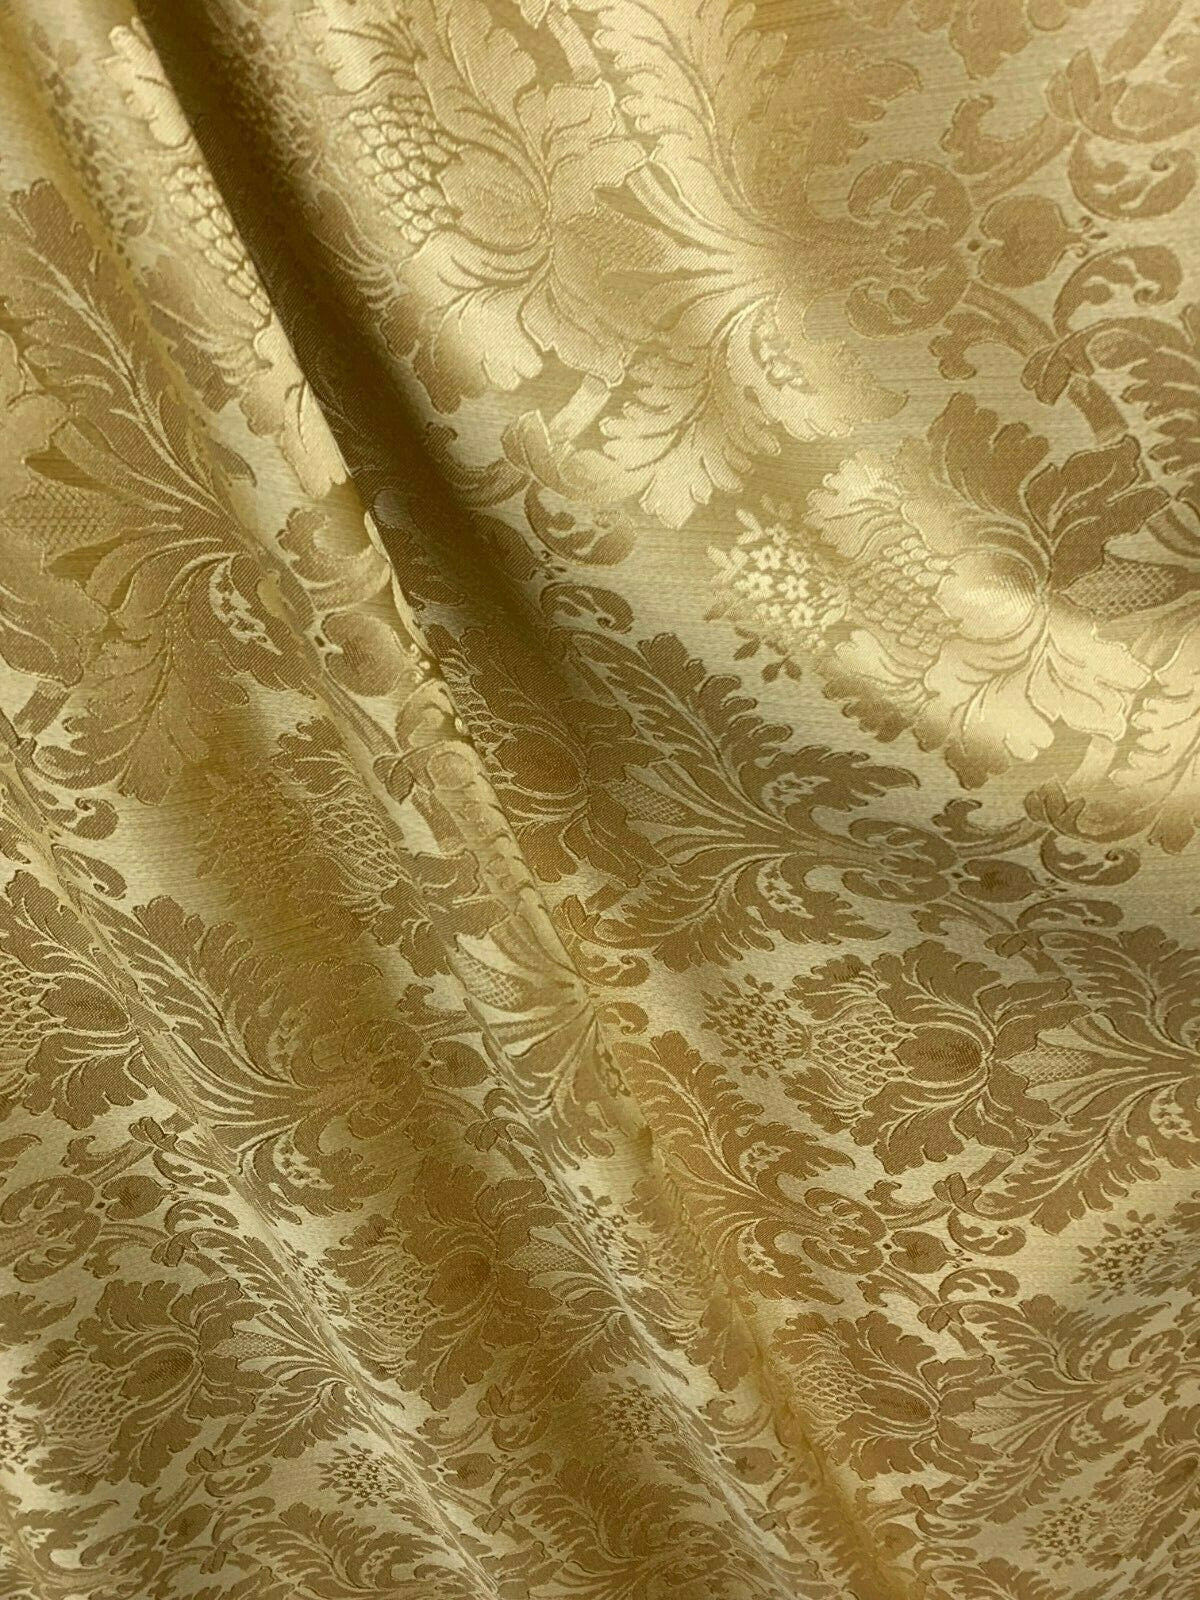 GOLD Damask Jacquard Brocade Flower Floral Fabric (110 in.) Sold By The Yard